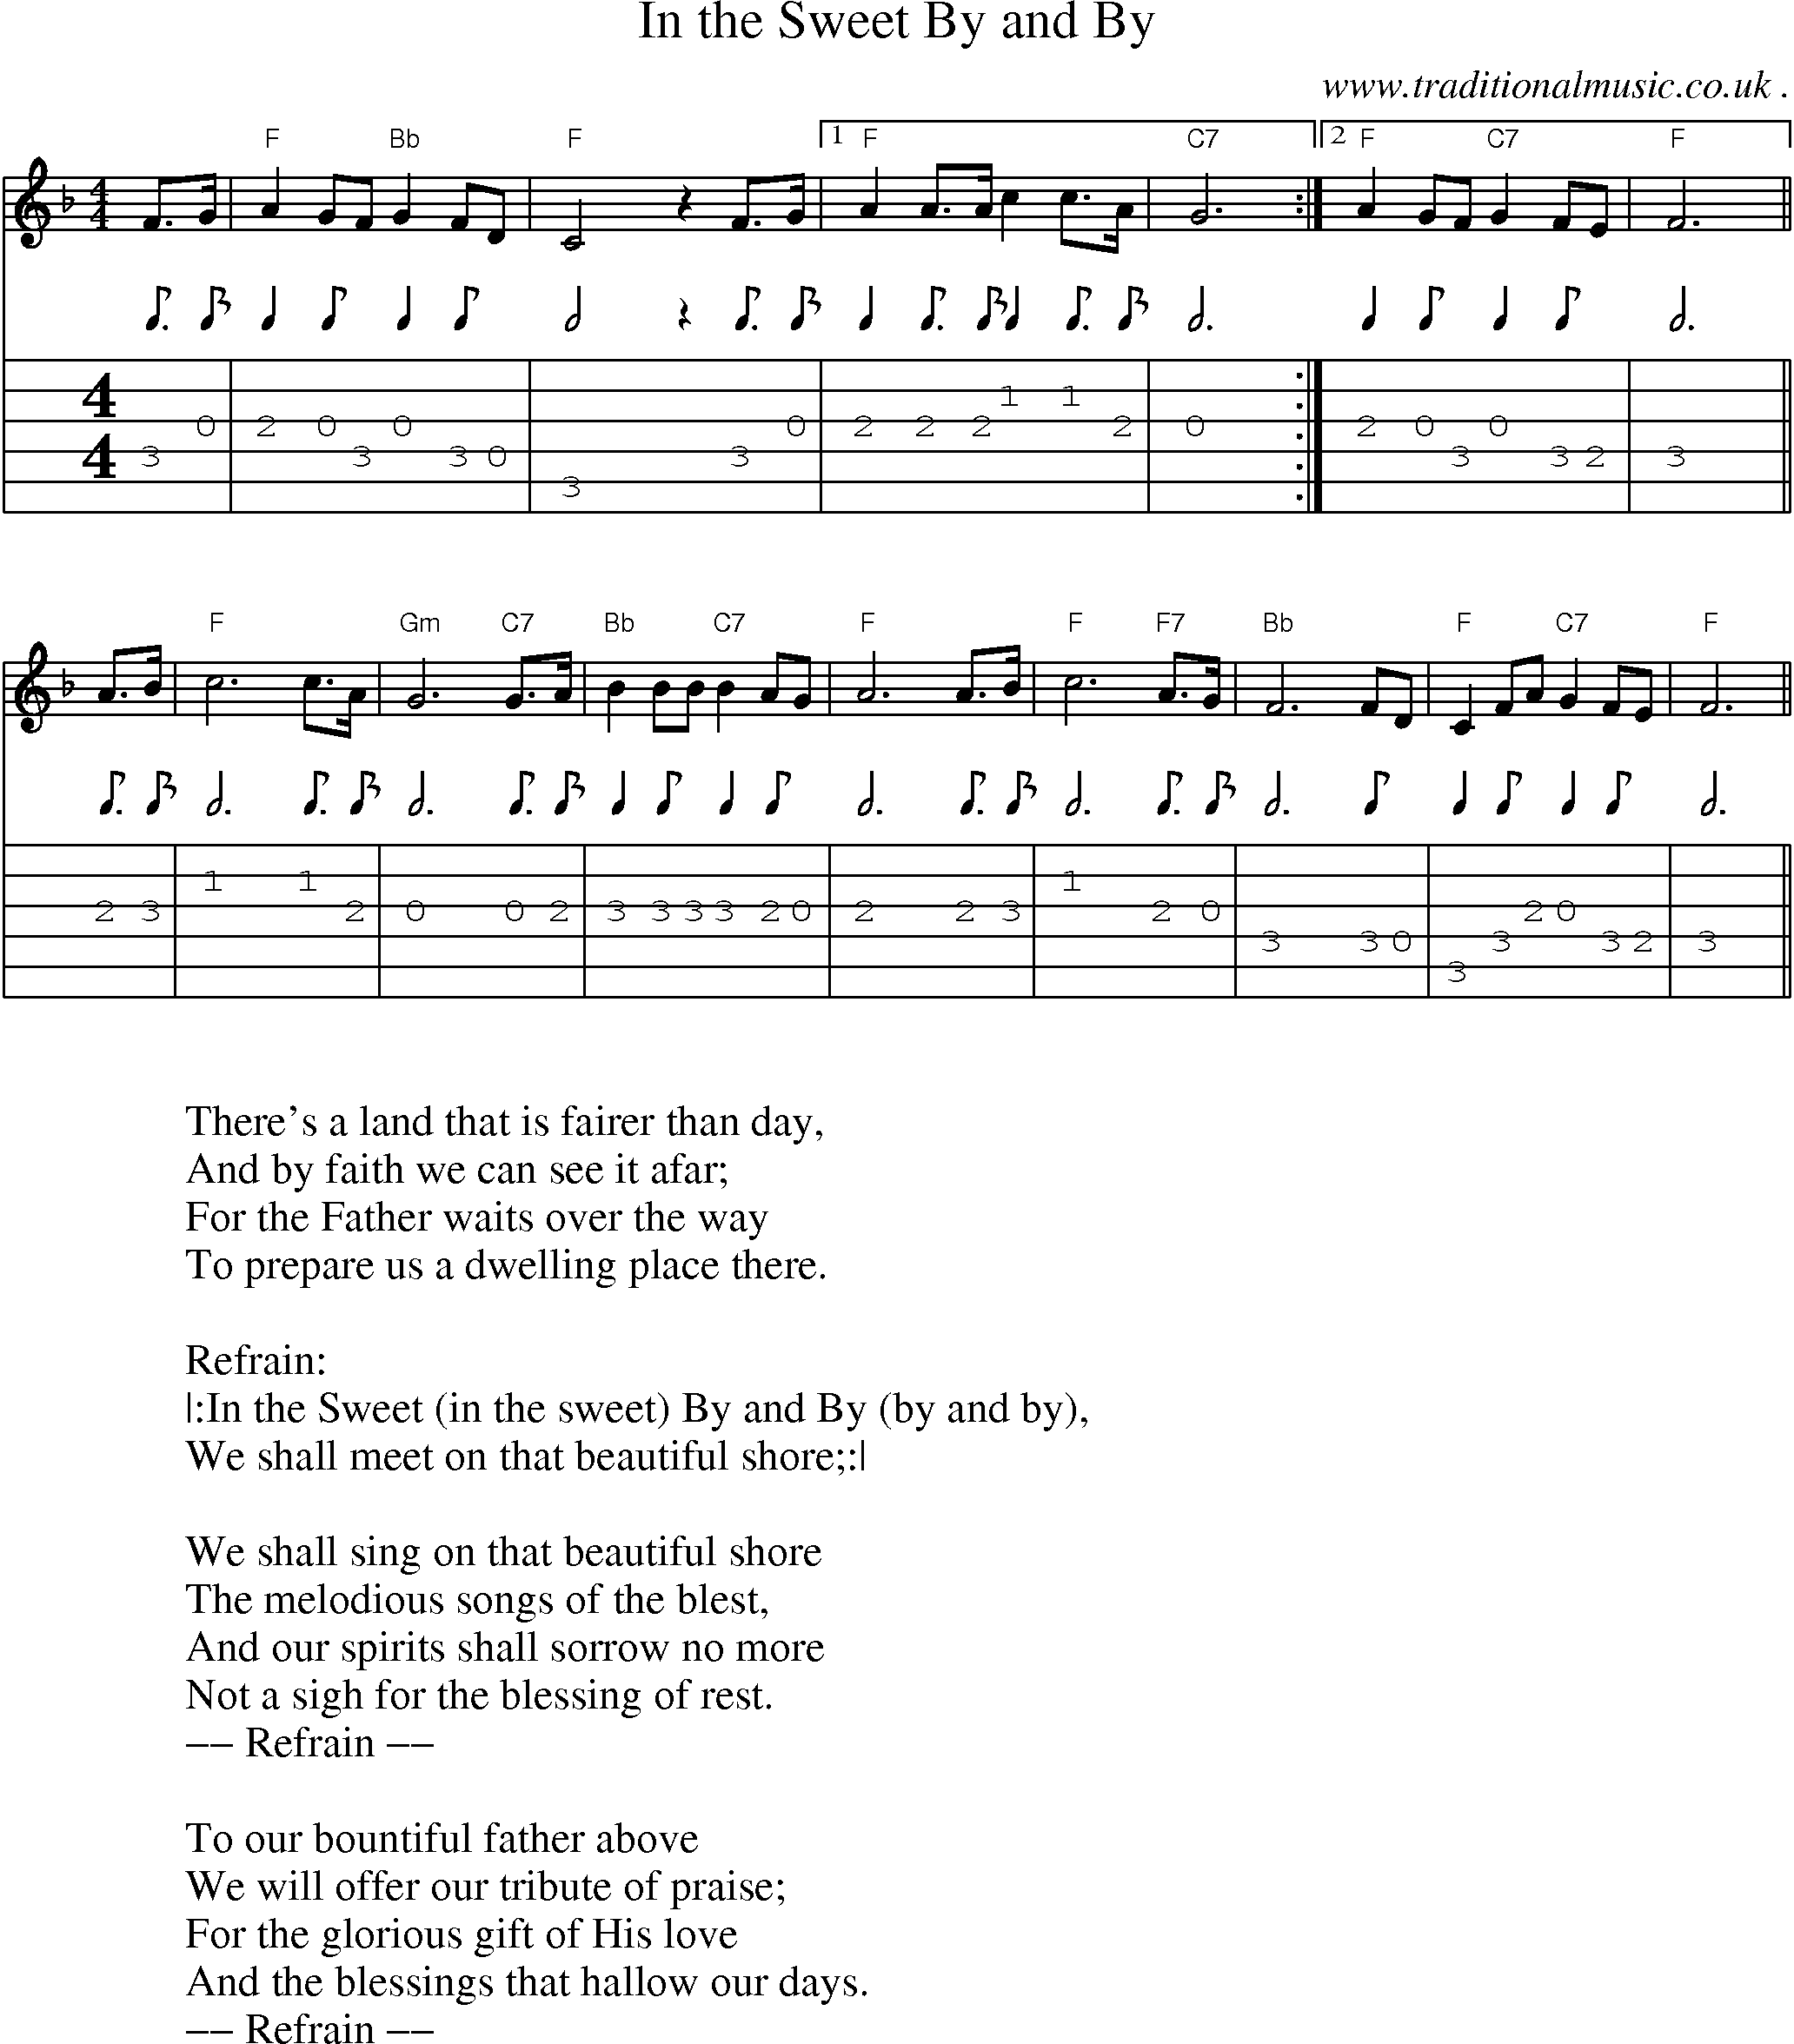 Music Score and Guitar Tabs for In The Sweet By And By